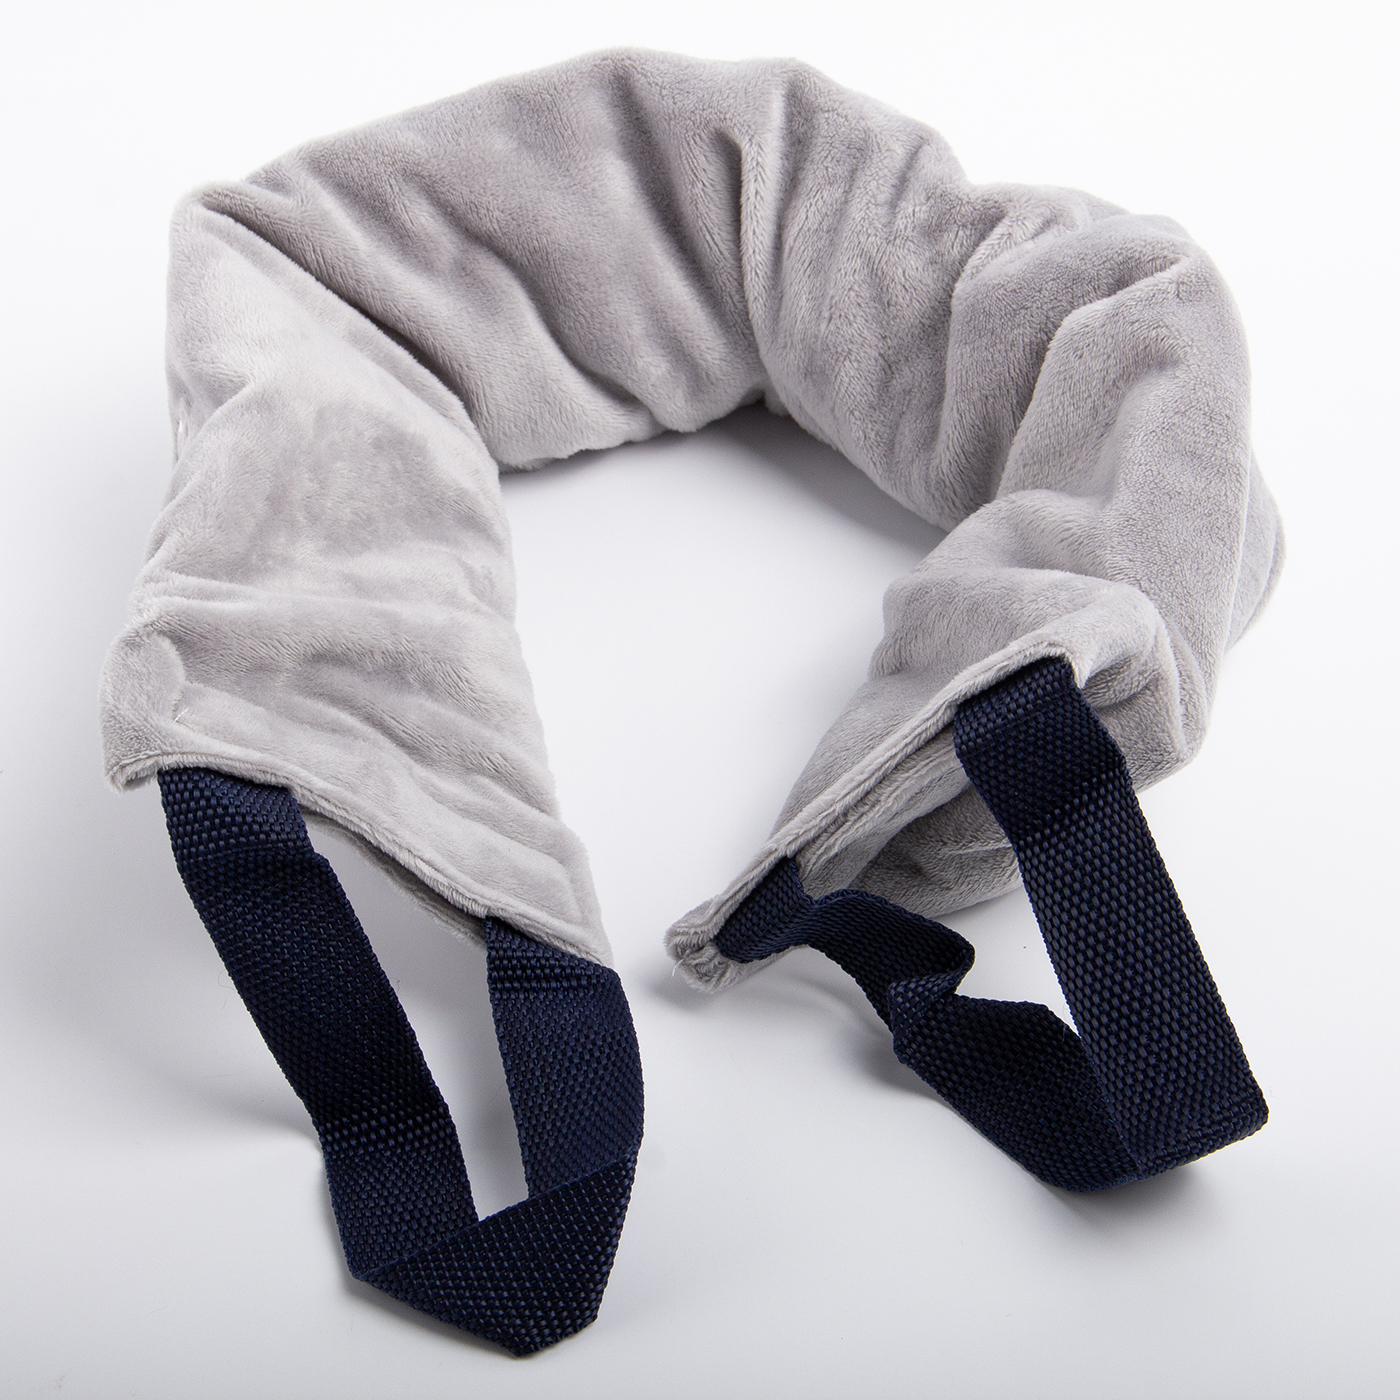 Hot Cold Therapy Neck Wrap4